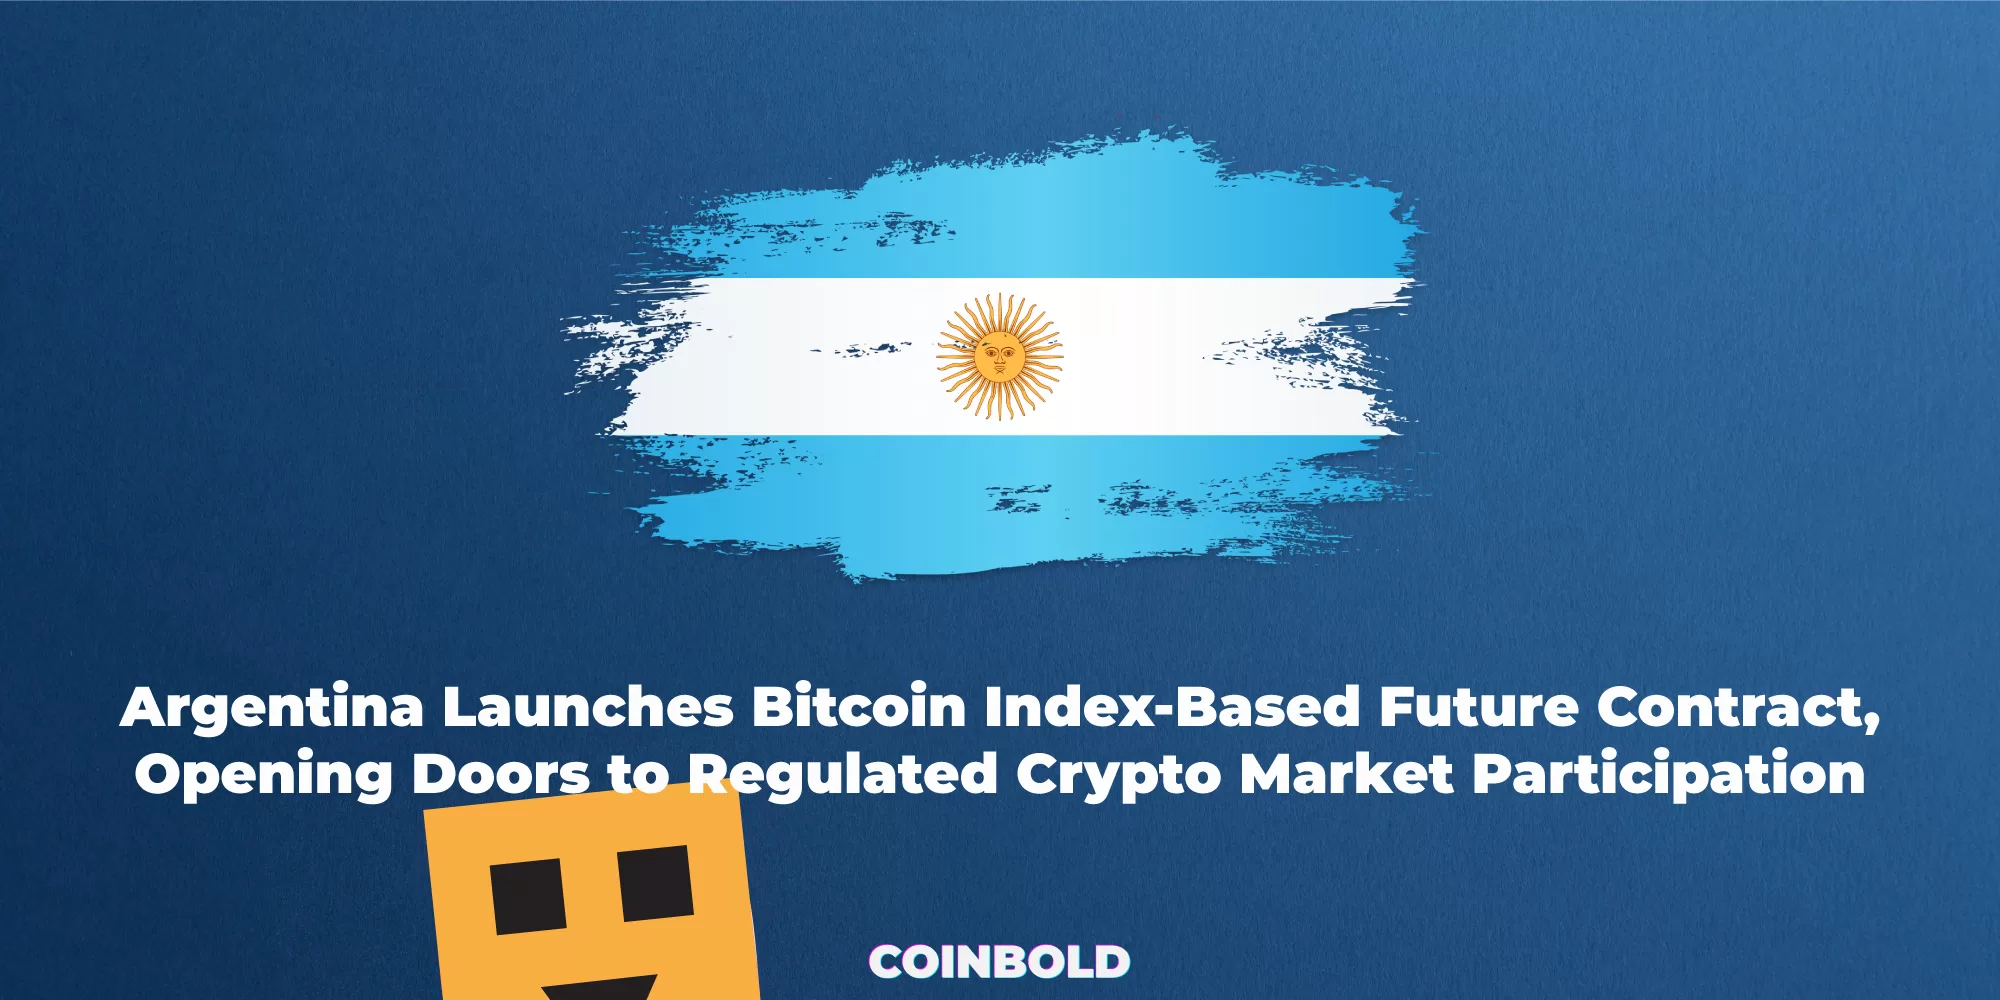 Argentina Launches Bitcoin Index-Based Future Contract, Opening Doors to Regulated Crypto Market Participation